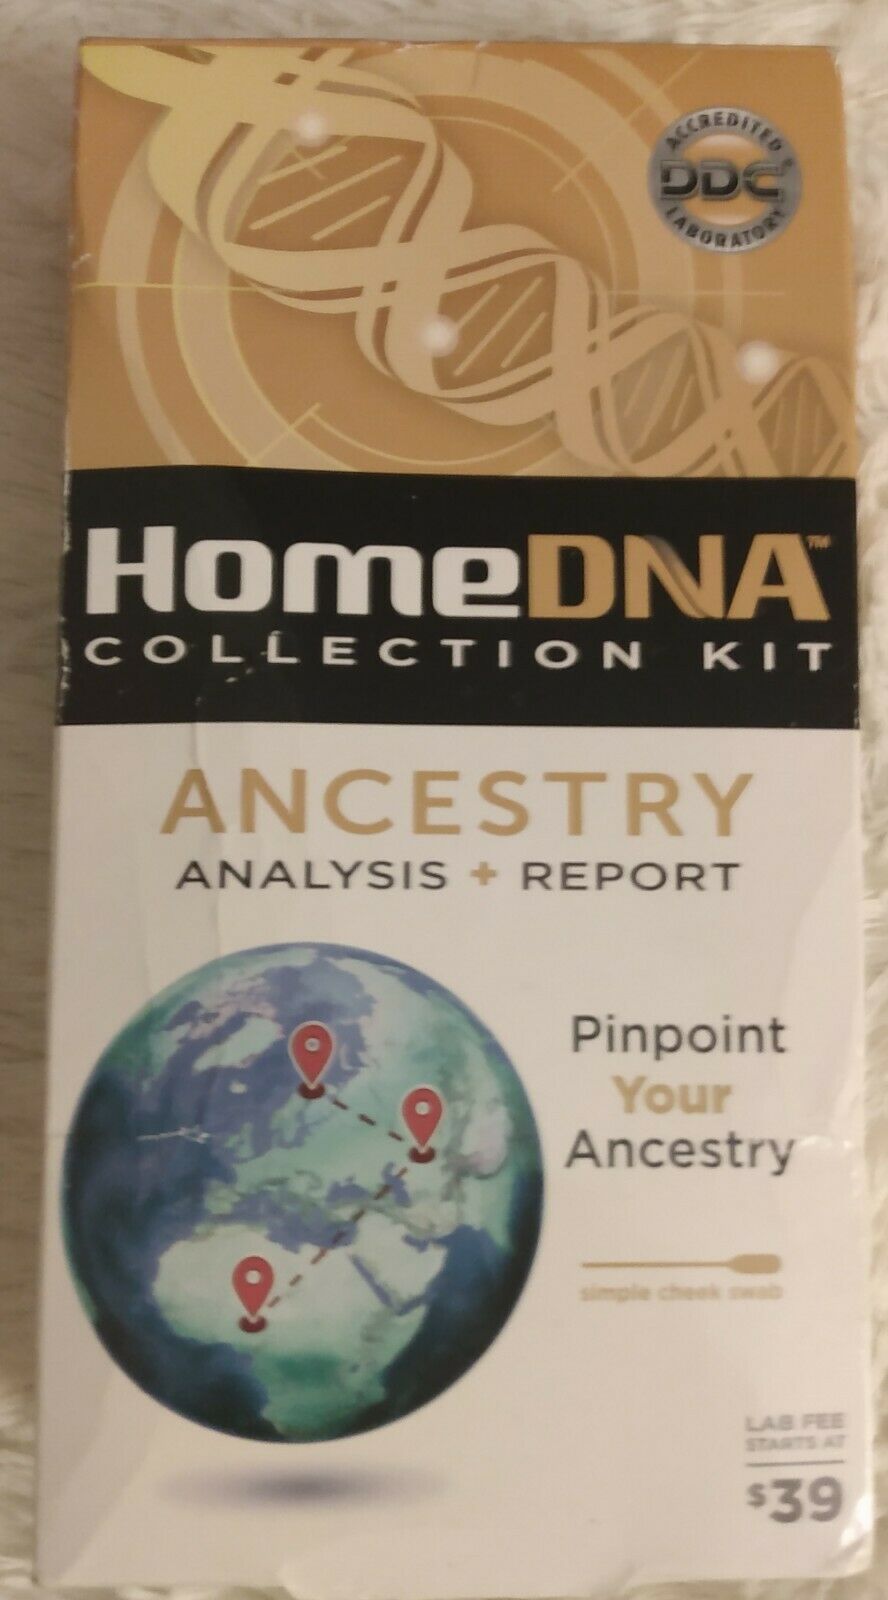 Home Dna Collection Kit (ancestry Analysis + Report)